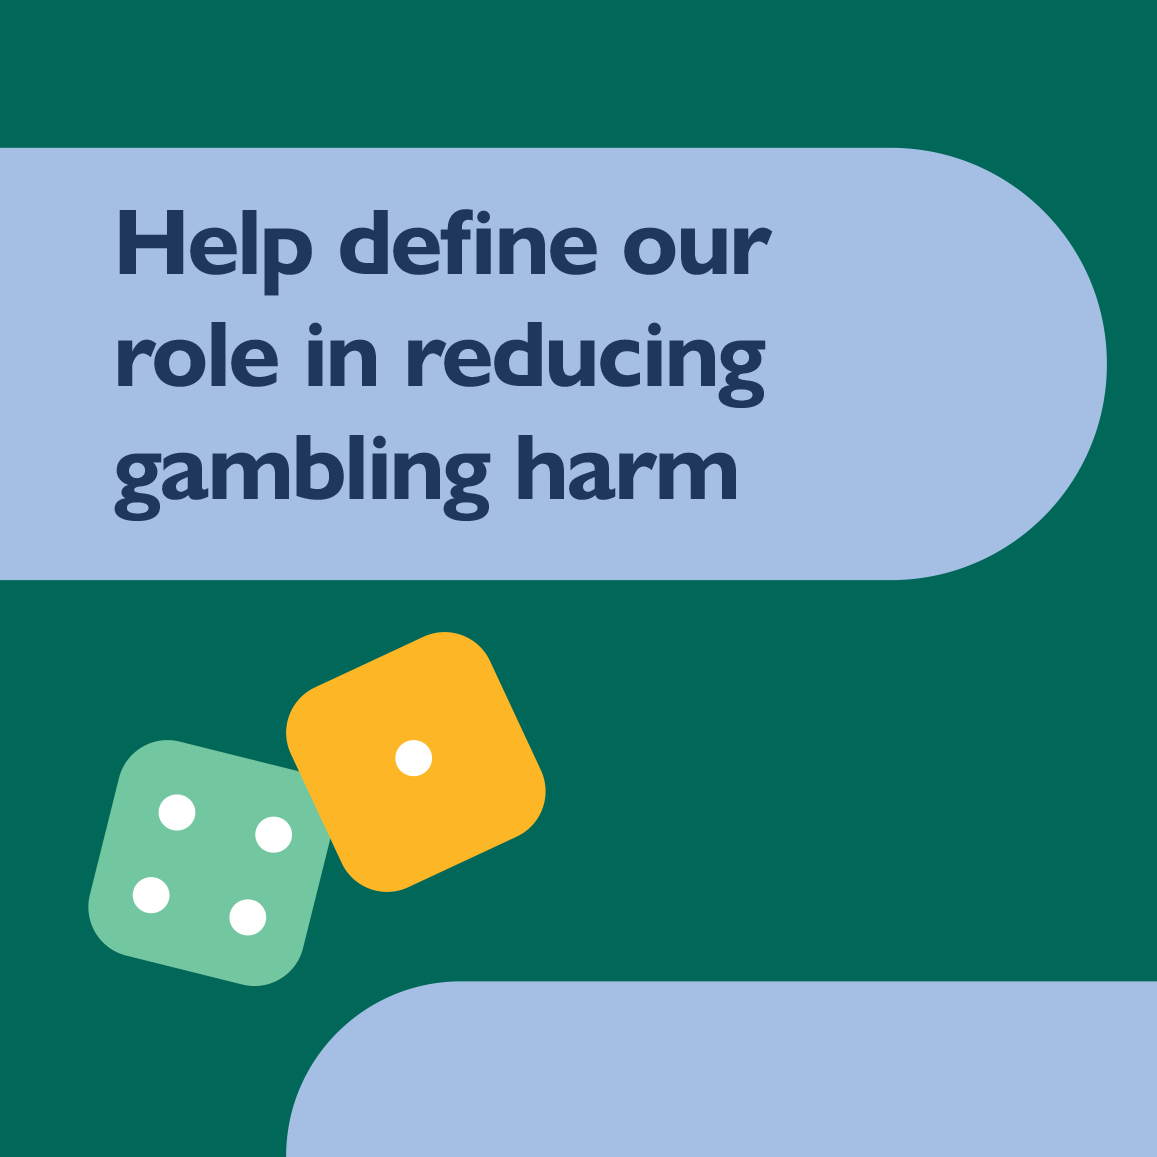 Help define our role in reducing gambling harm (dice)